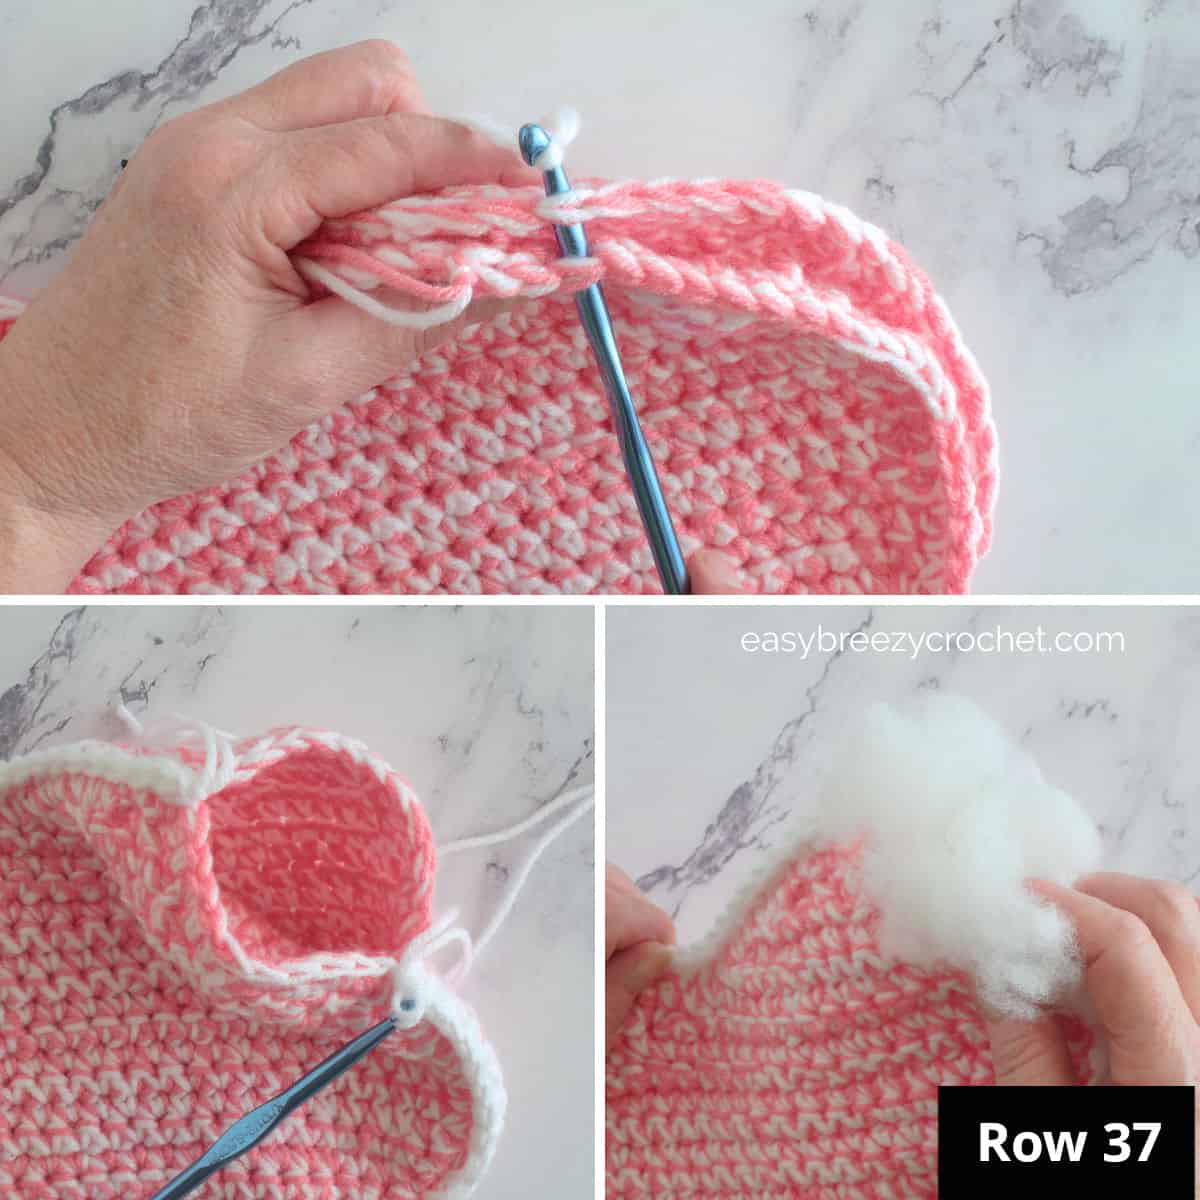 Joining and filling the crochet pillow.